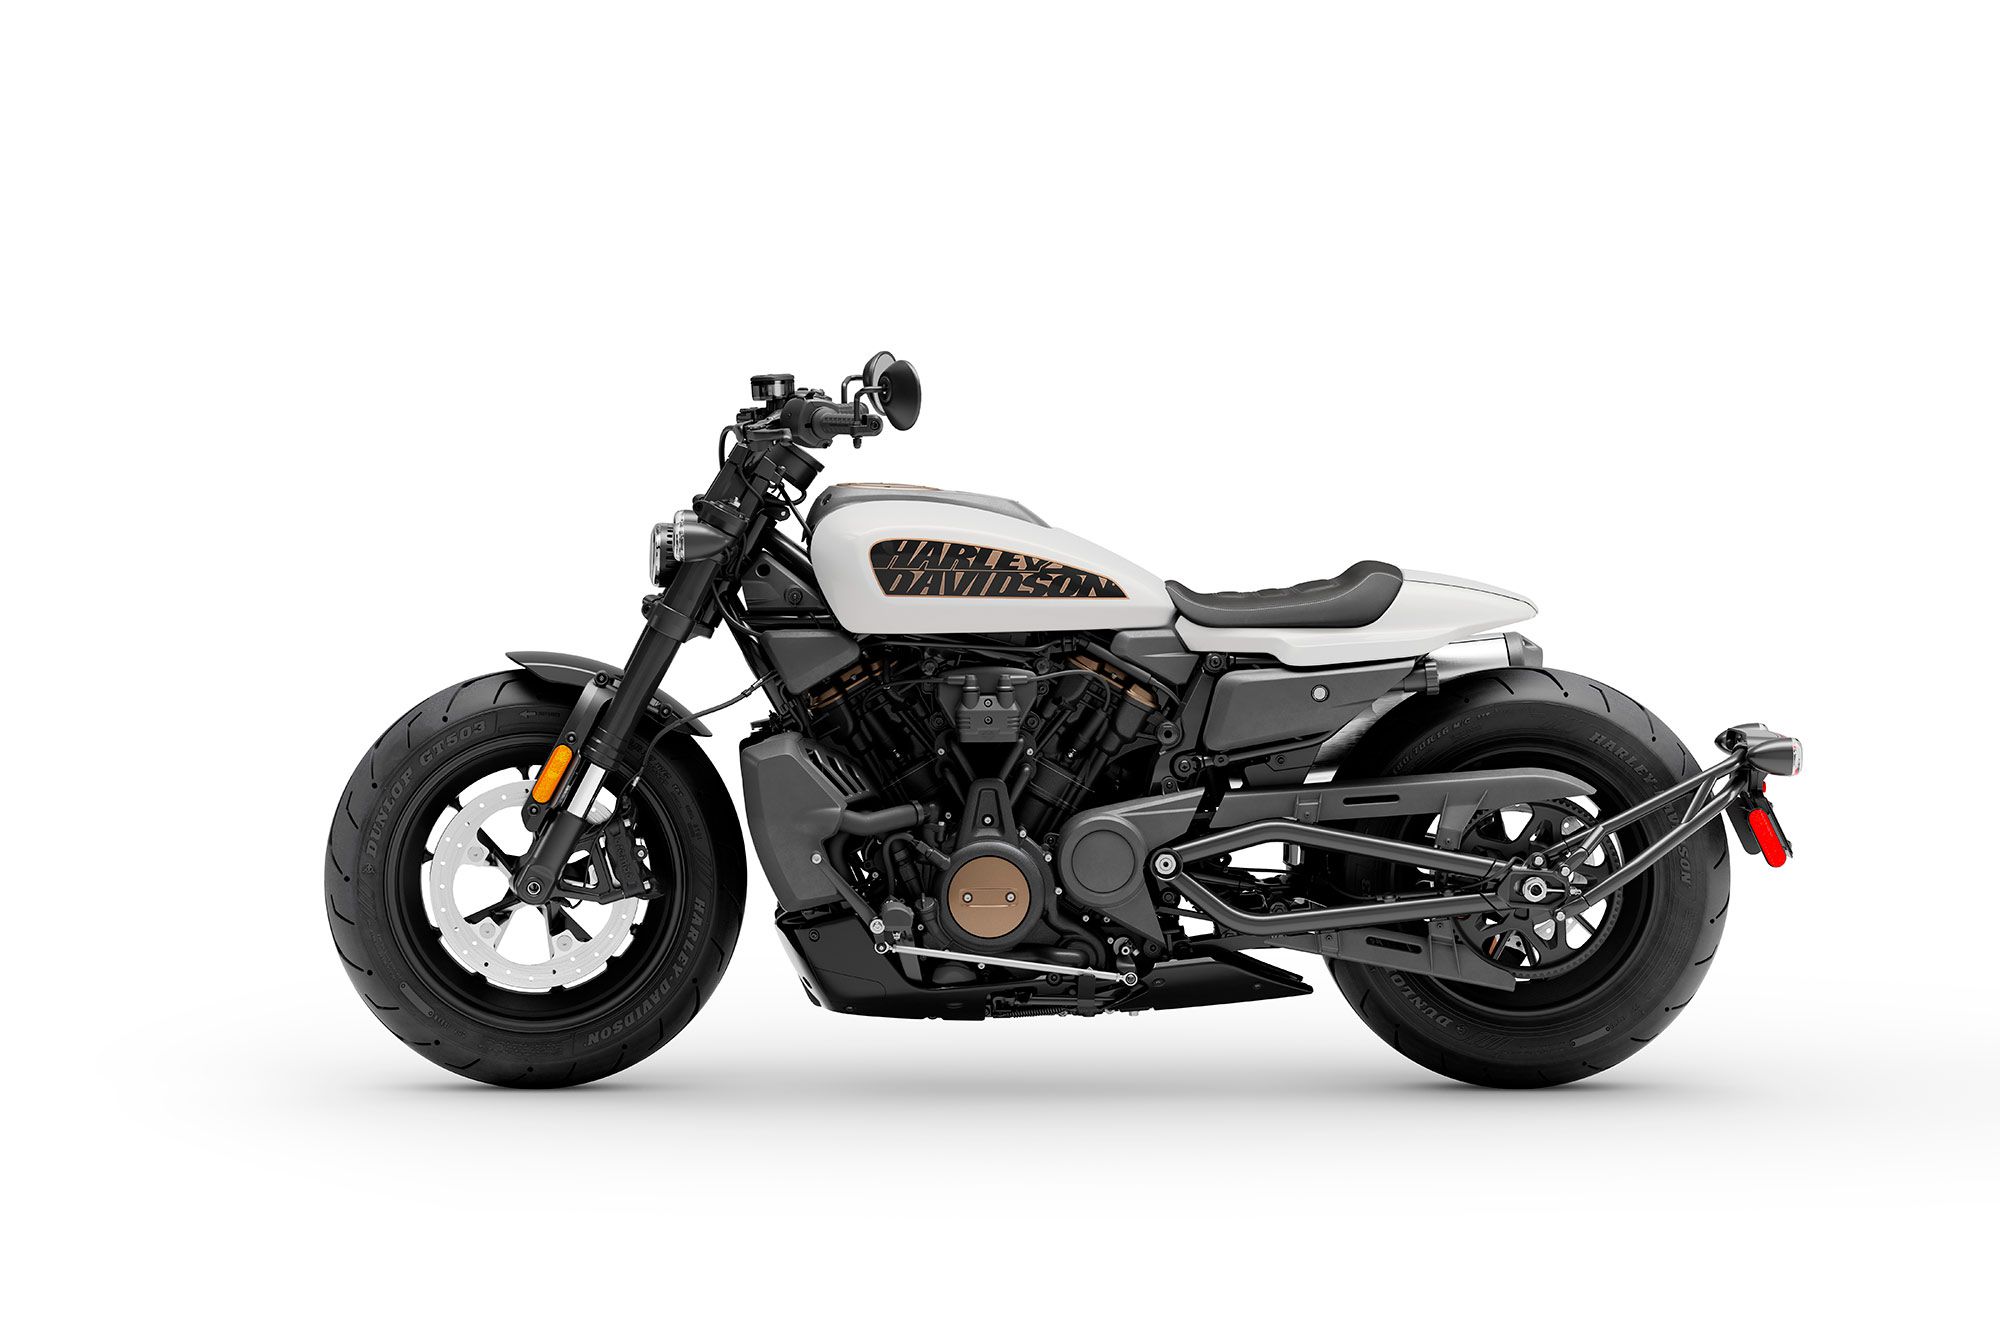 2021 Harley-Davidson Sportster S in Stone Washed White Pearl.